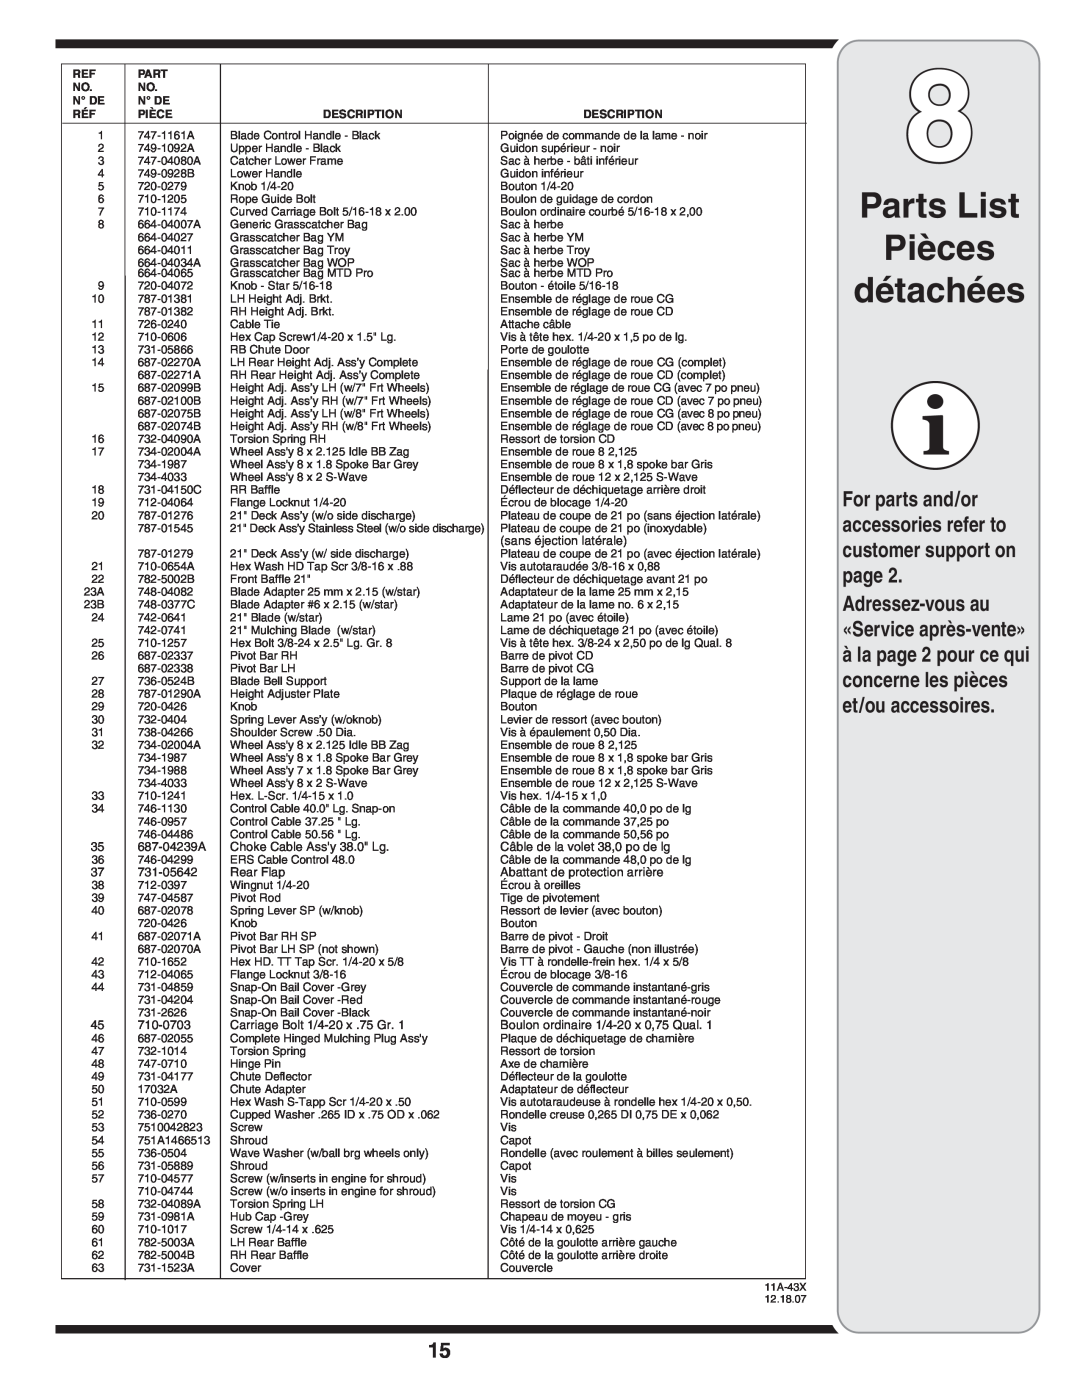 MTD 60-1620-4 owner manual Parts List Pièces détachées, For parts and/or accessories refer to customer support on page 